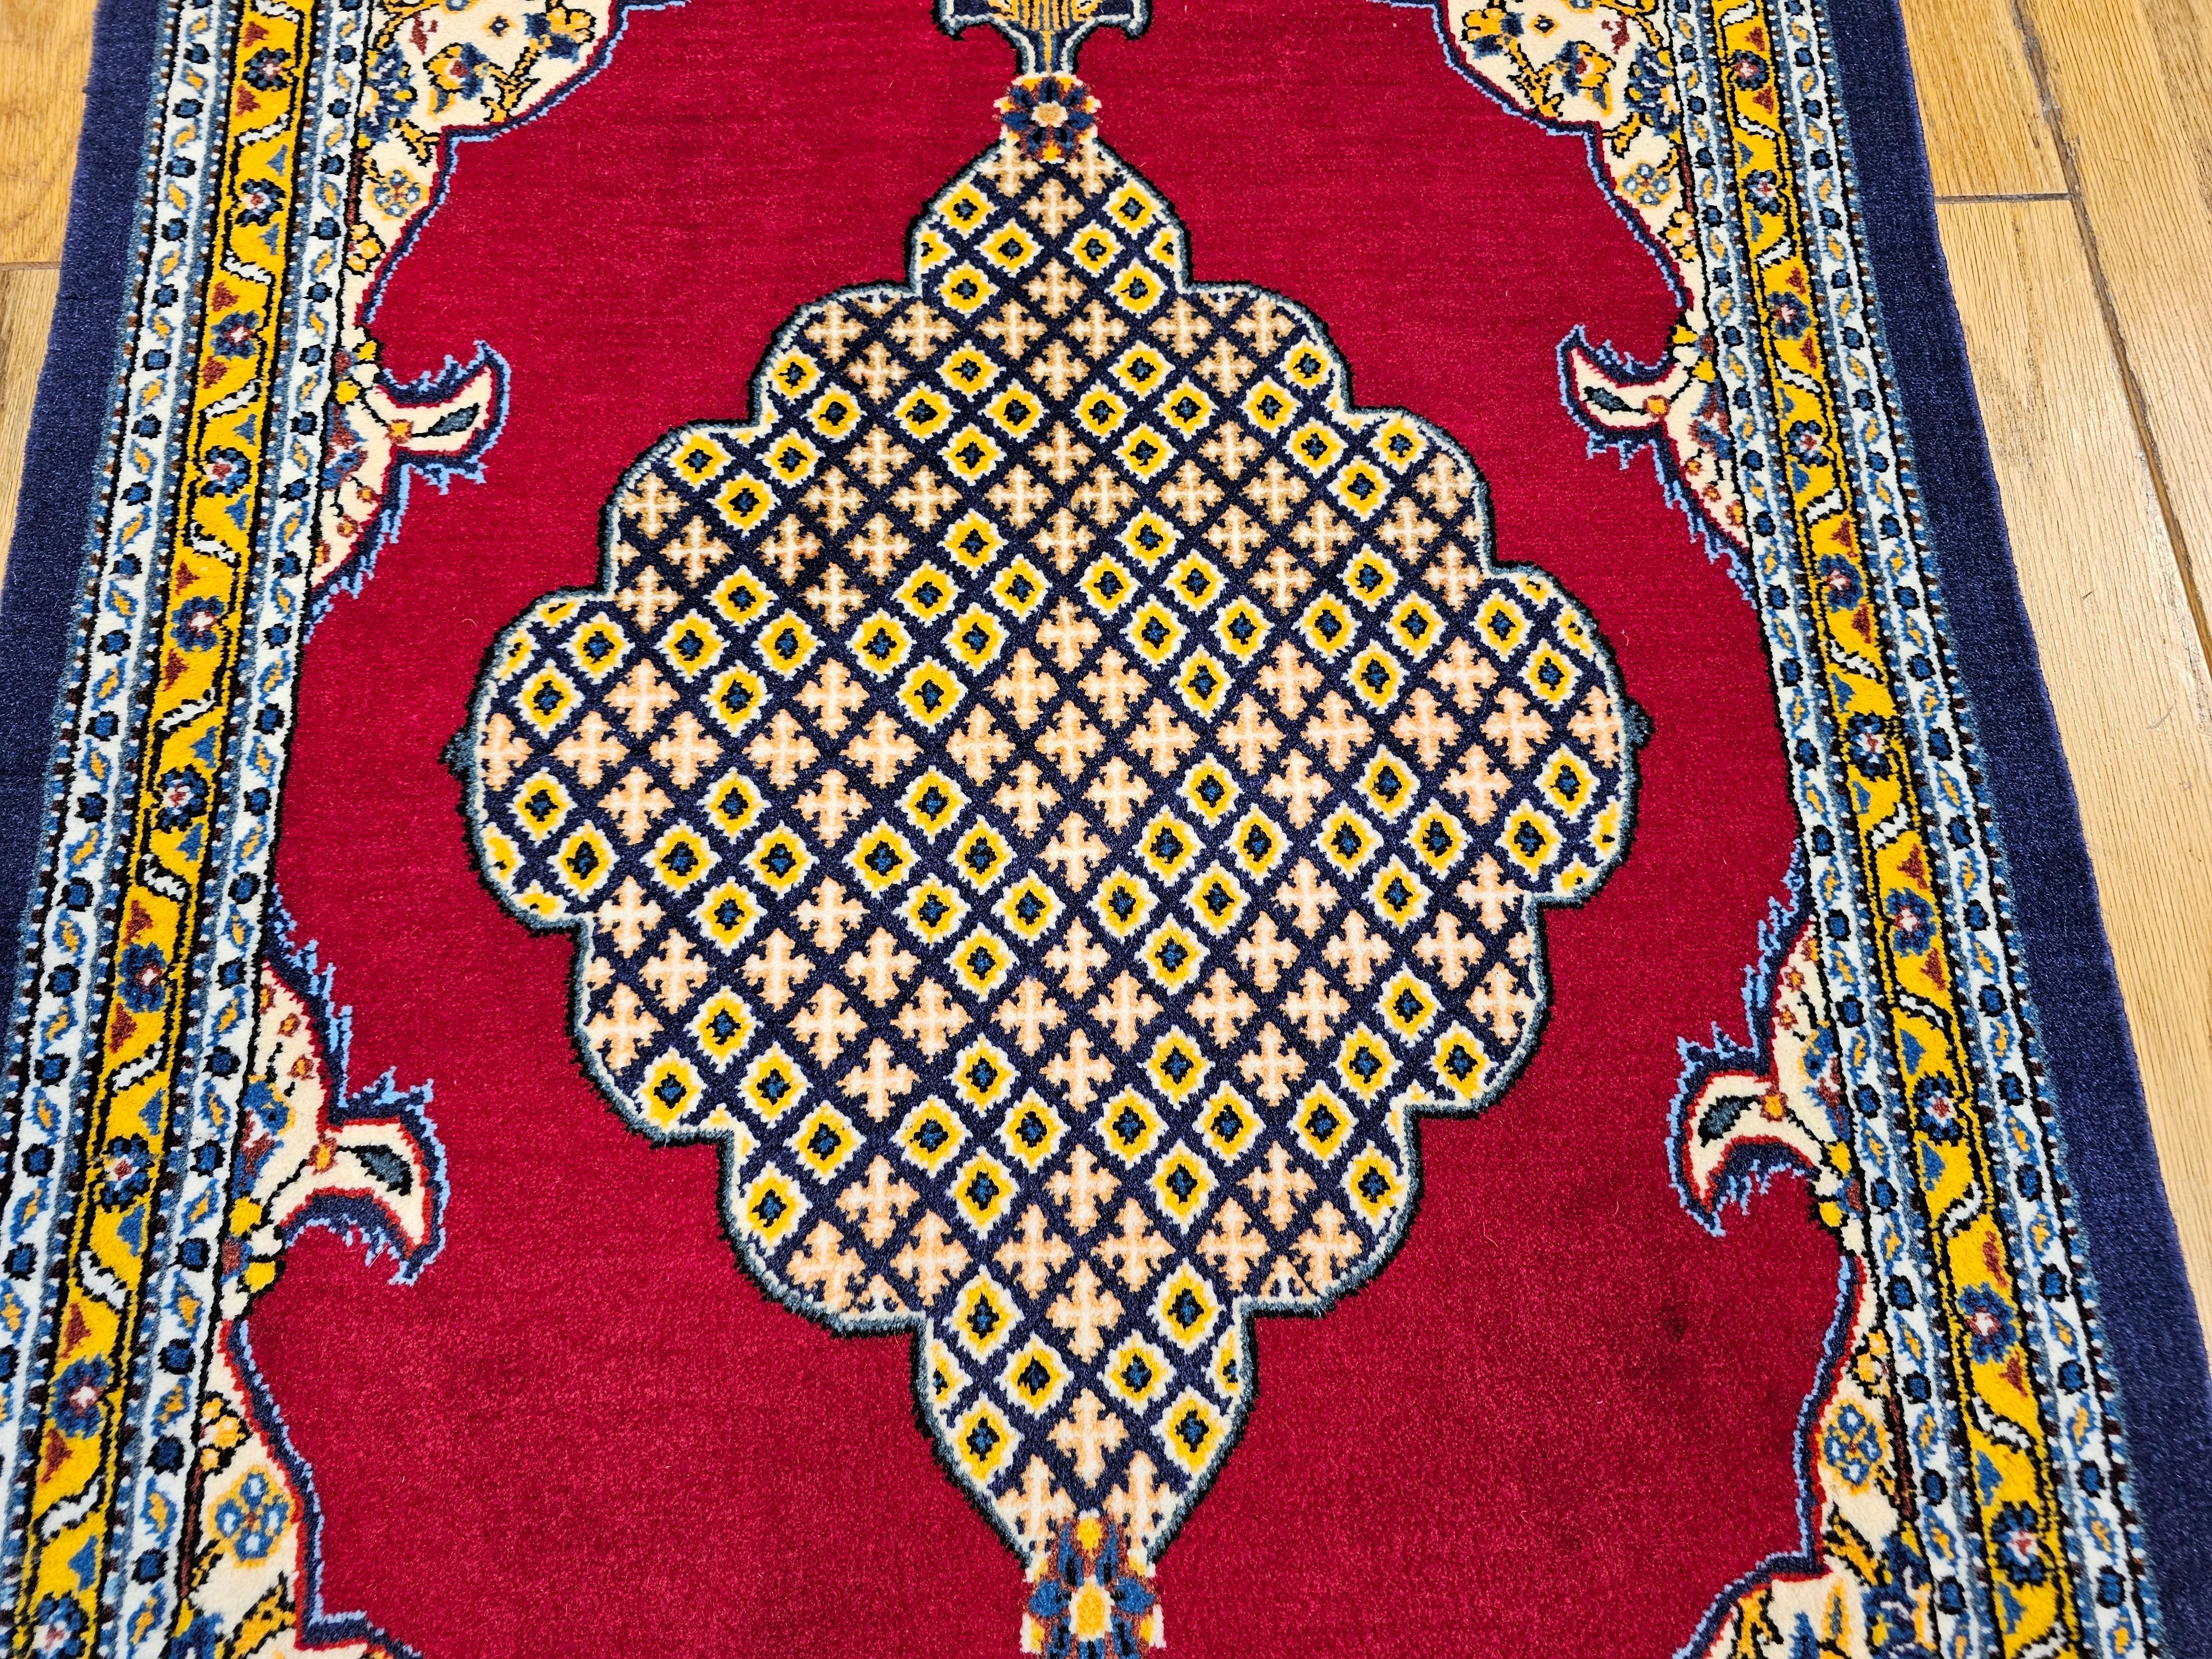 Vintage Persian Qum Area Rug in a Geometric Pattern in Red, Navy, Ivory, Yellow In Good Condition For Sale In Barrington, IL